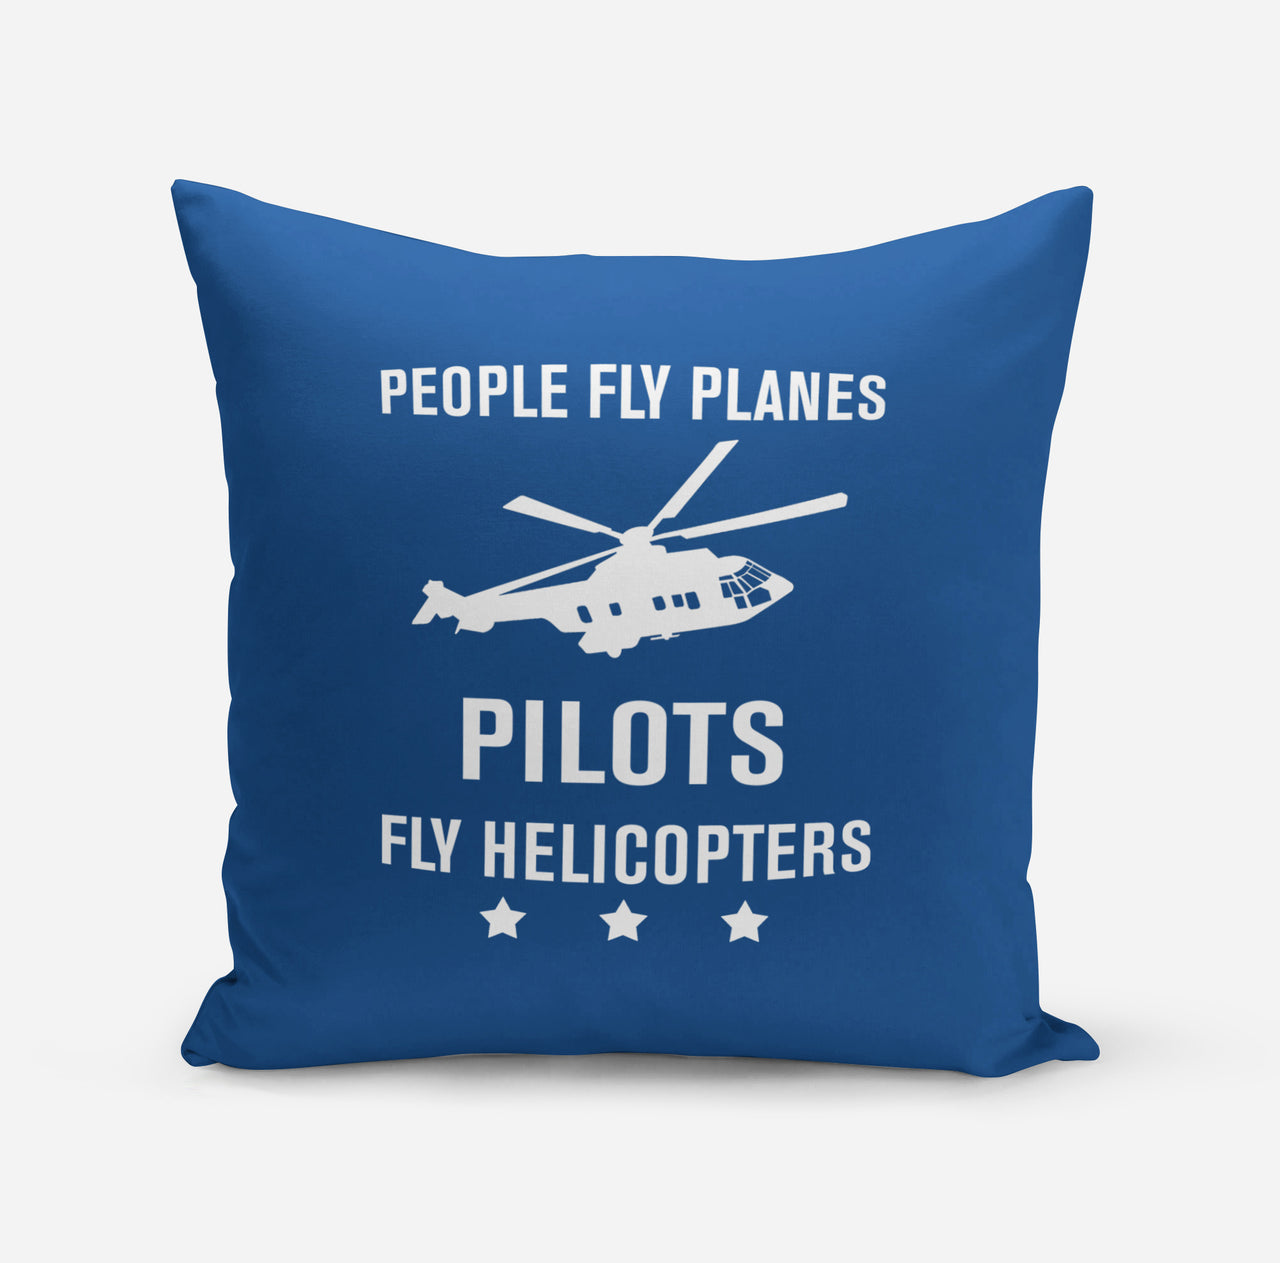 People Fly Planes Pilots Fly Helicopters Designed Pillows